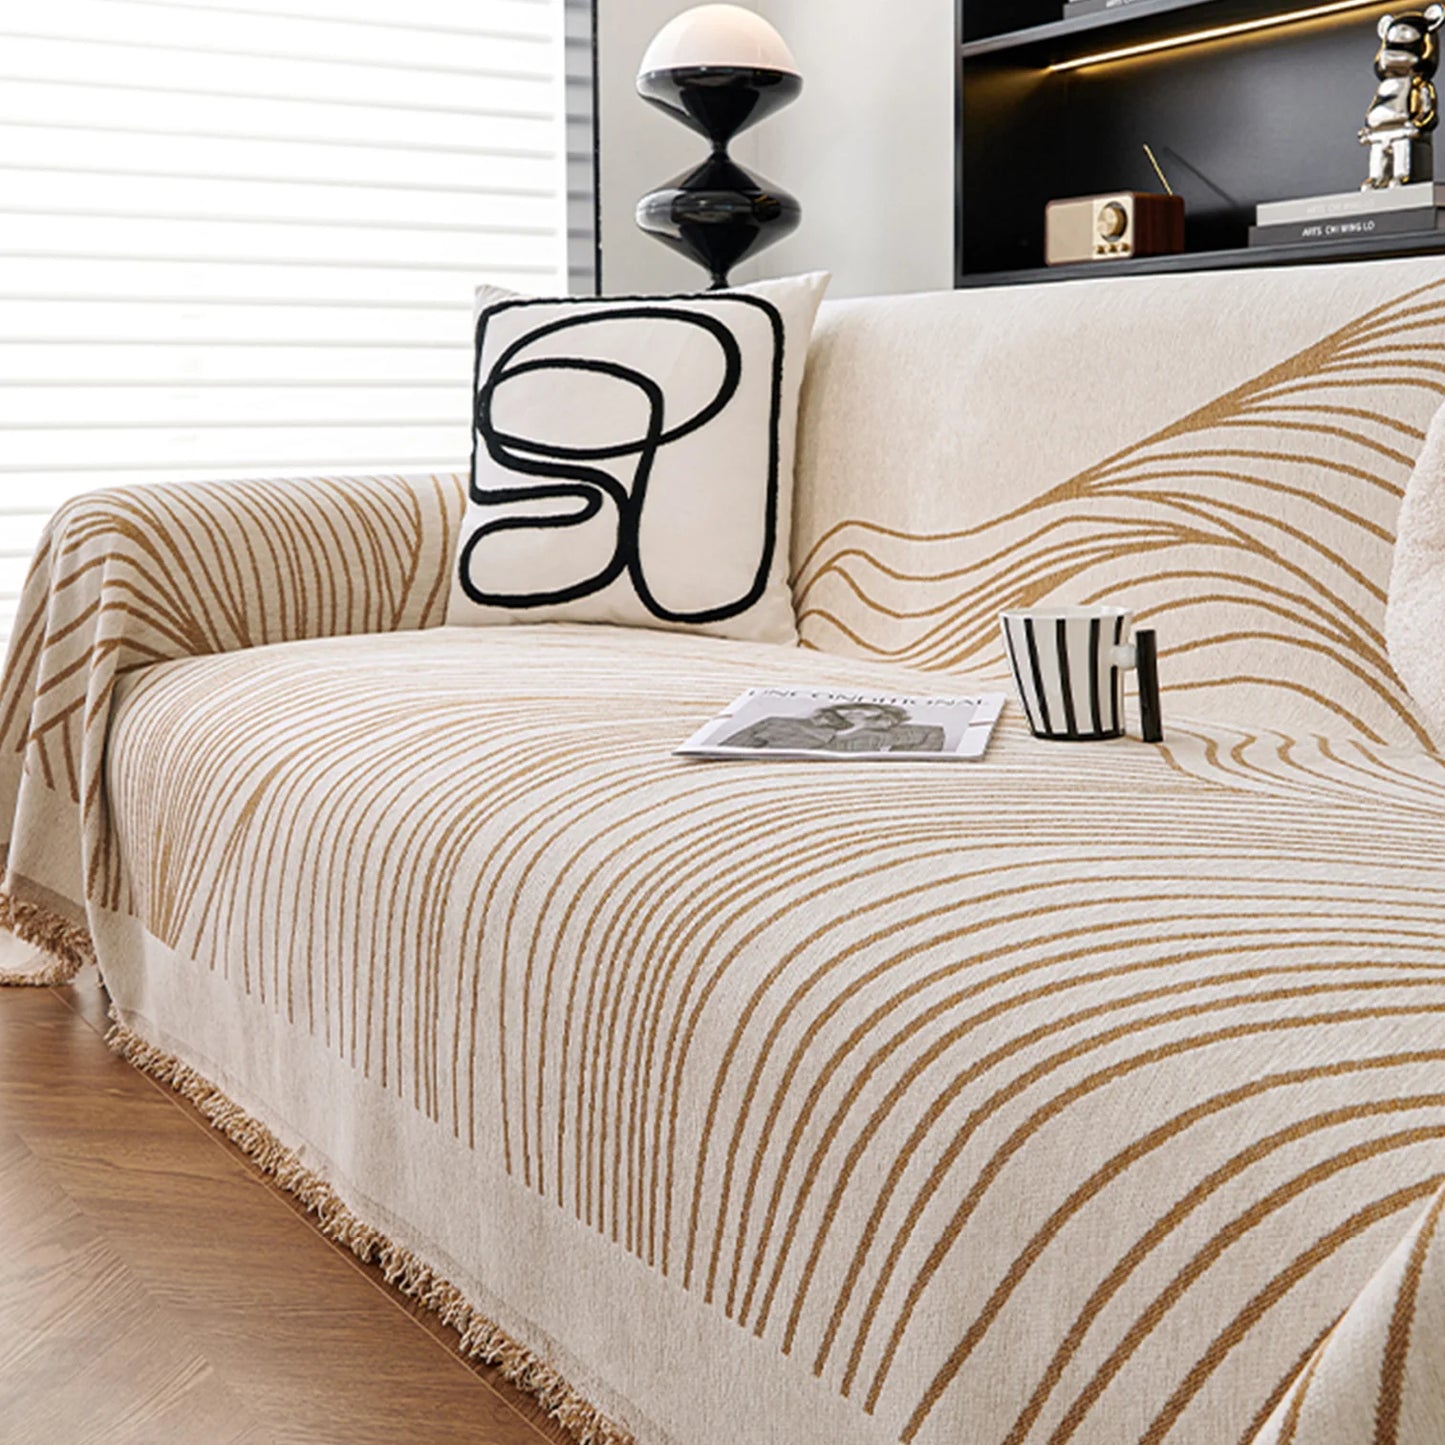 Reversible Jacquard Sofa / Couch Cover